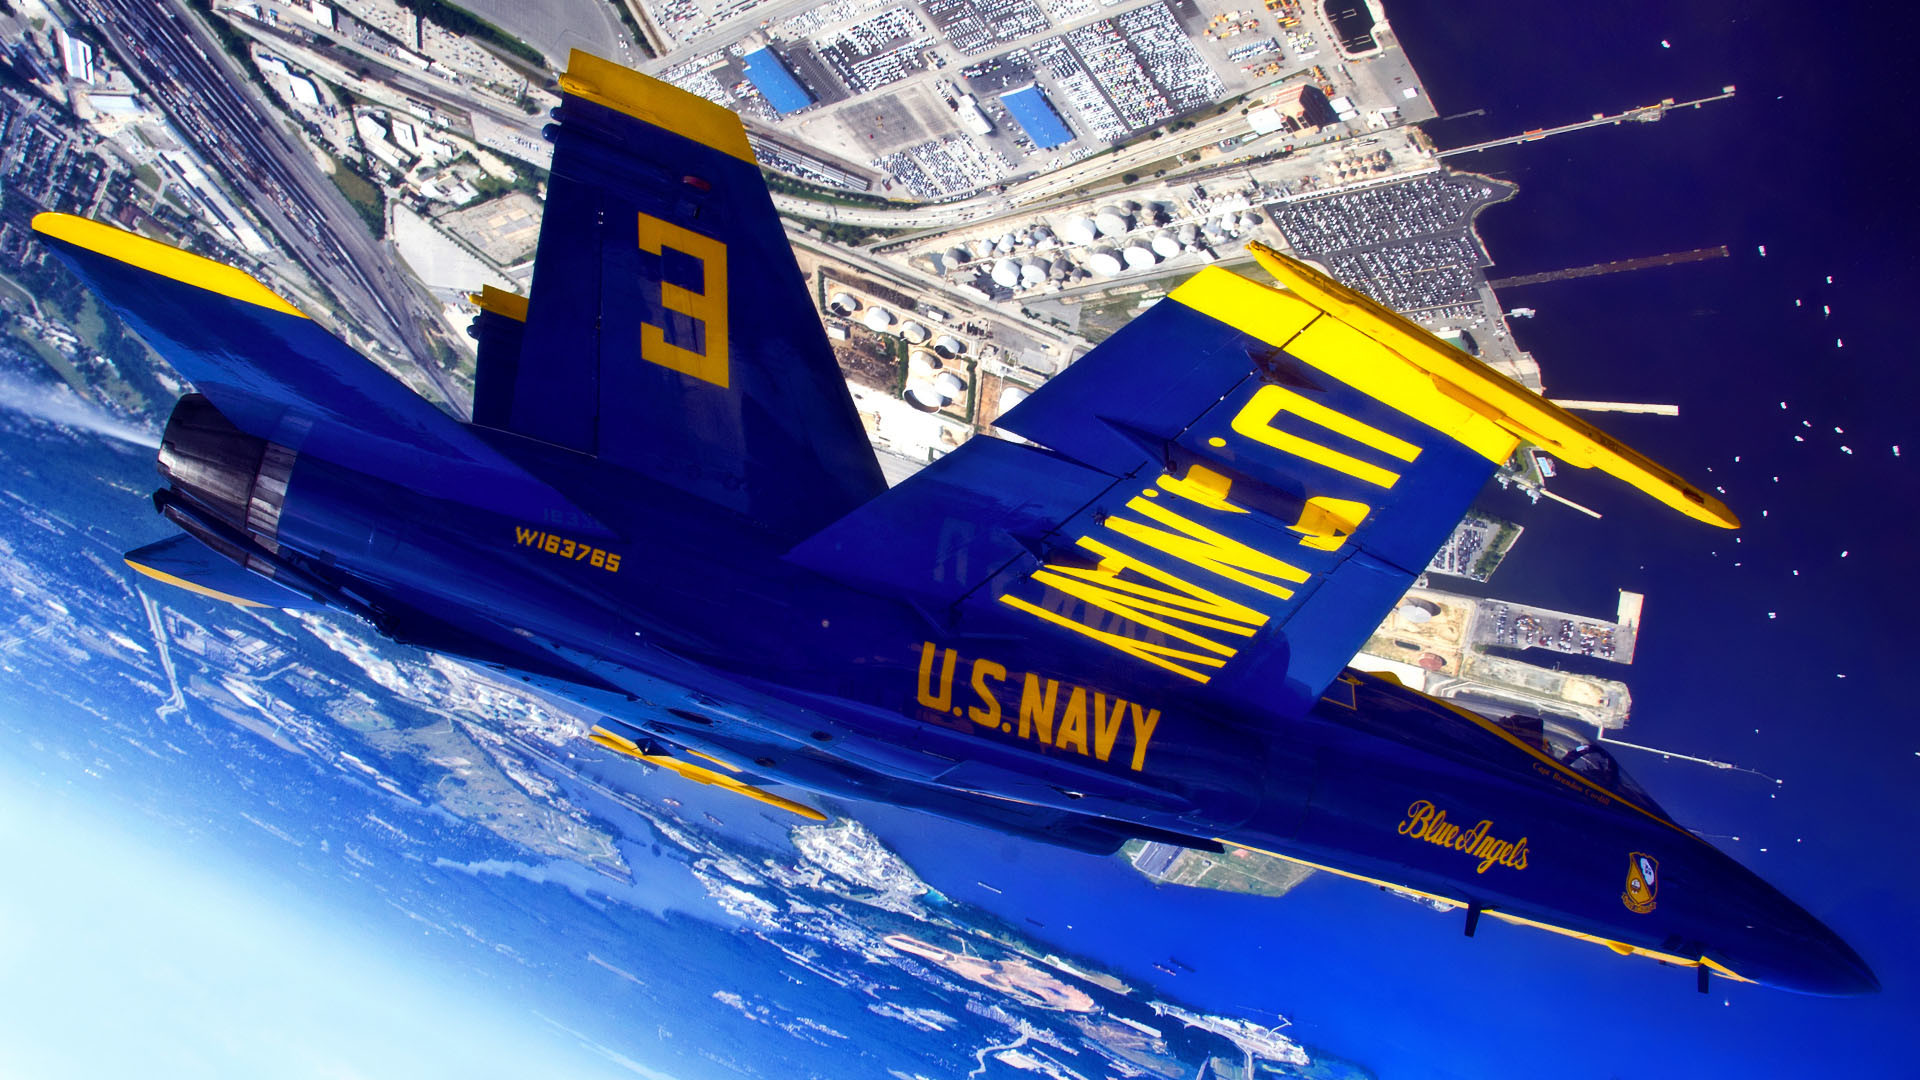 1920x1080 US Navy Blue Angels - Inverted view  wallpaper